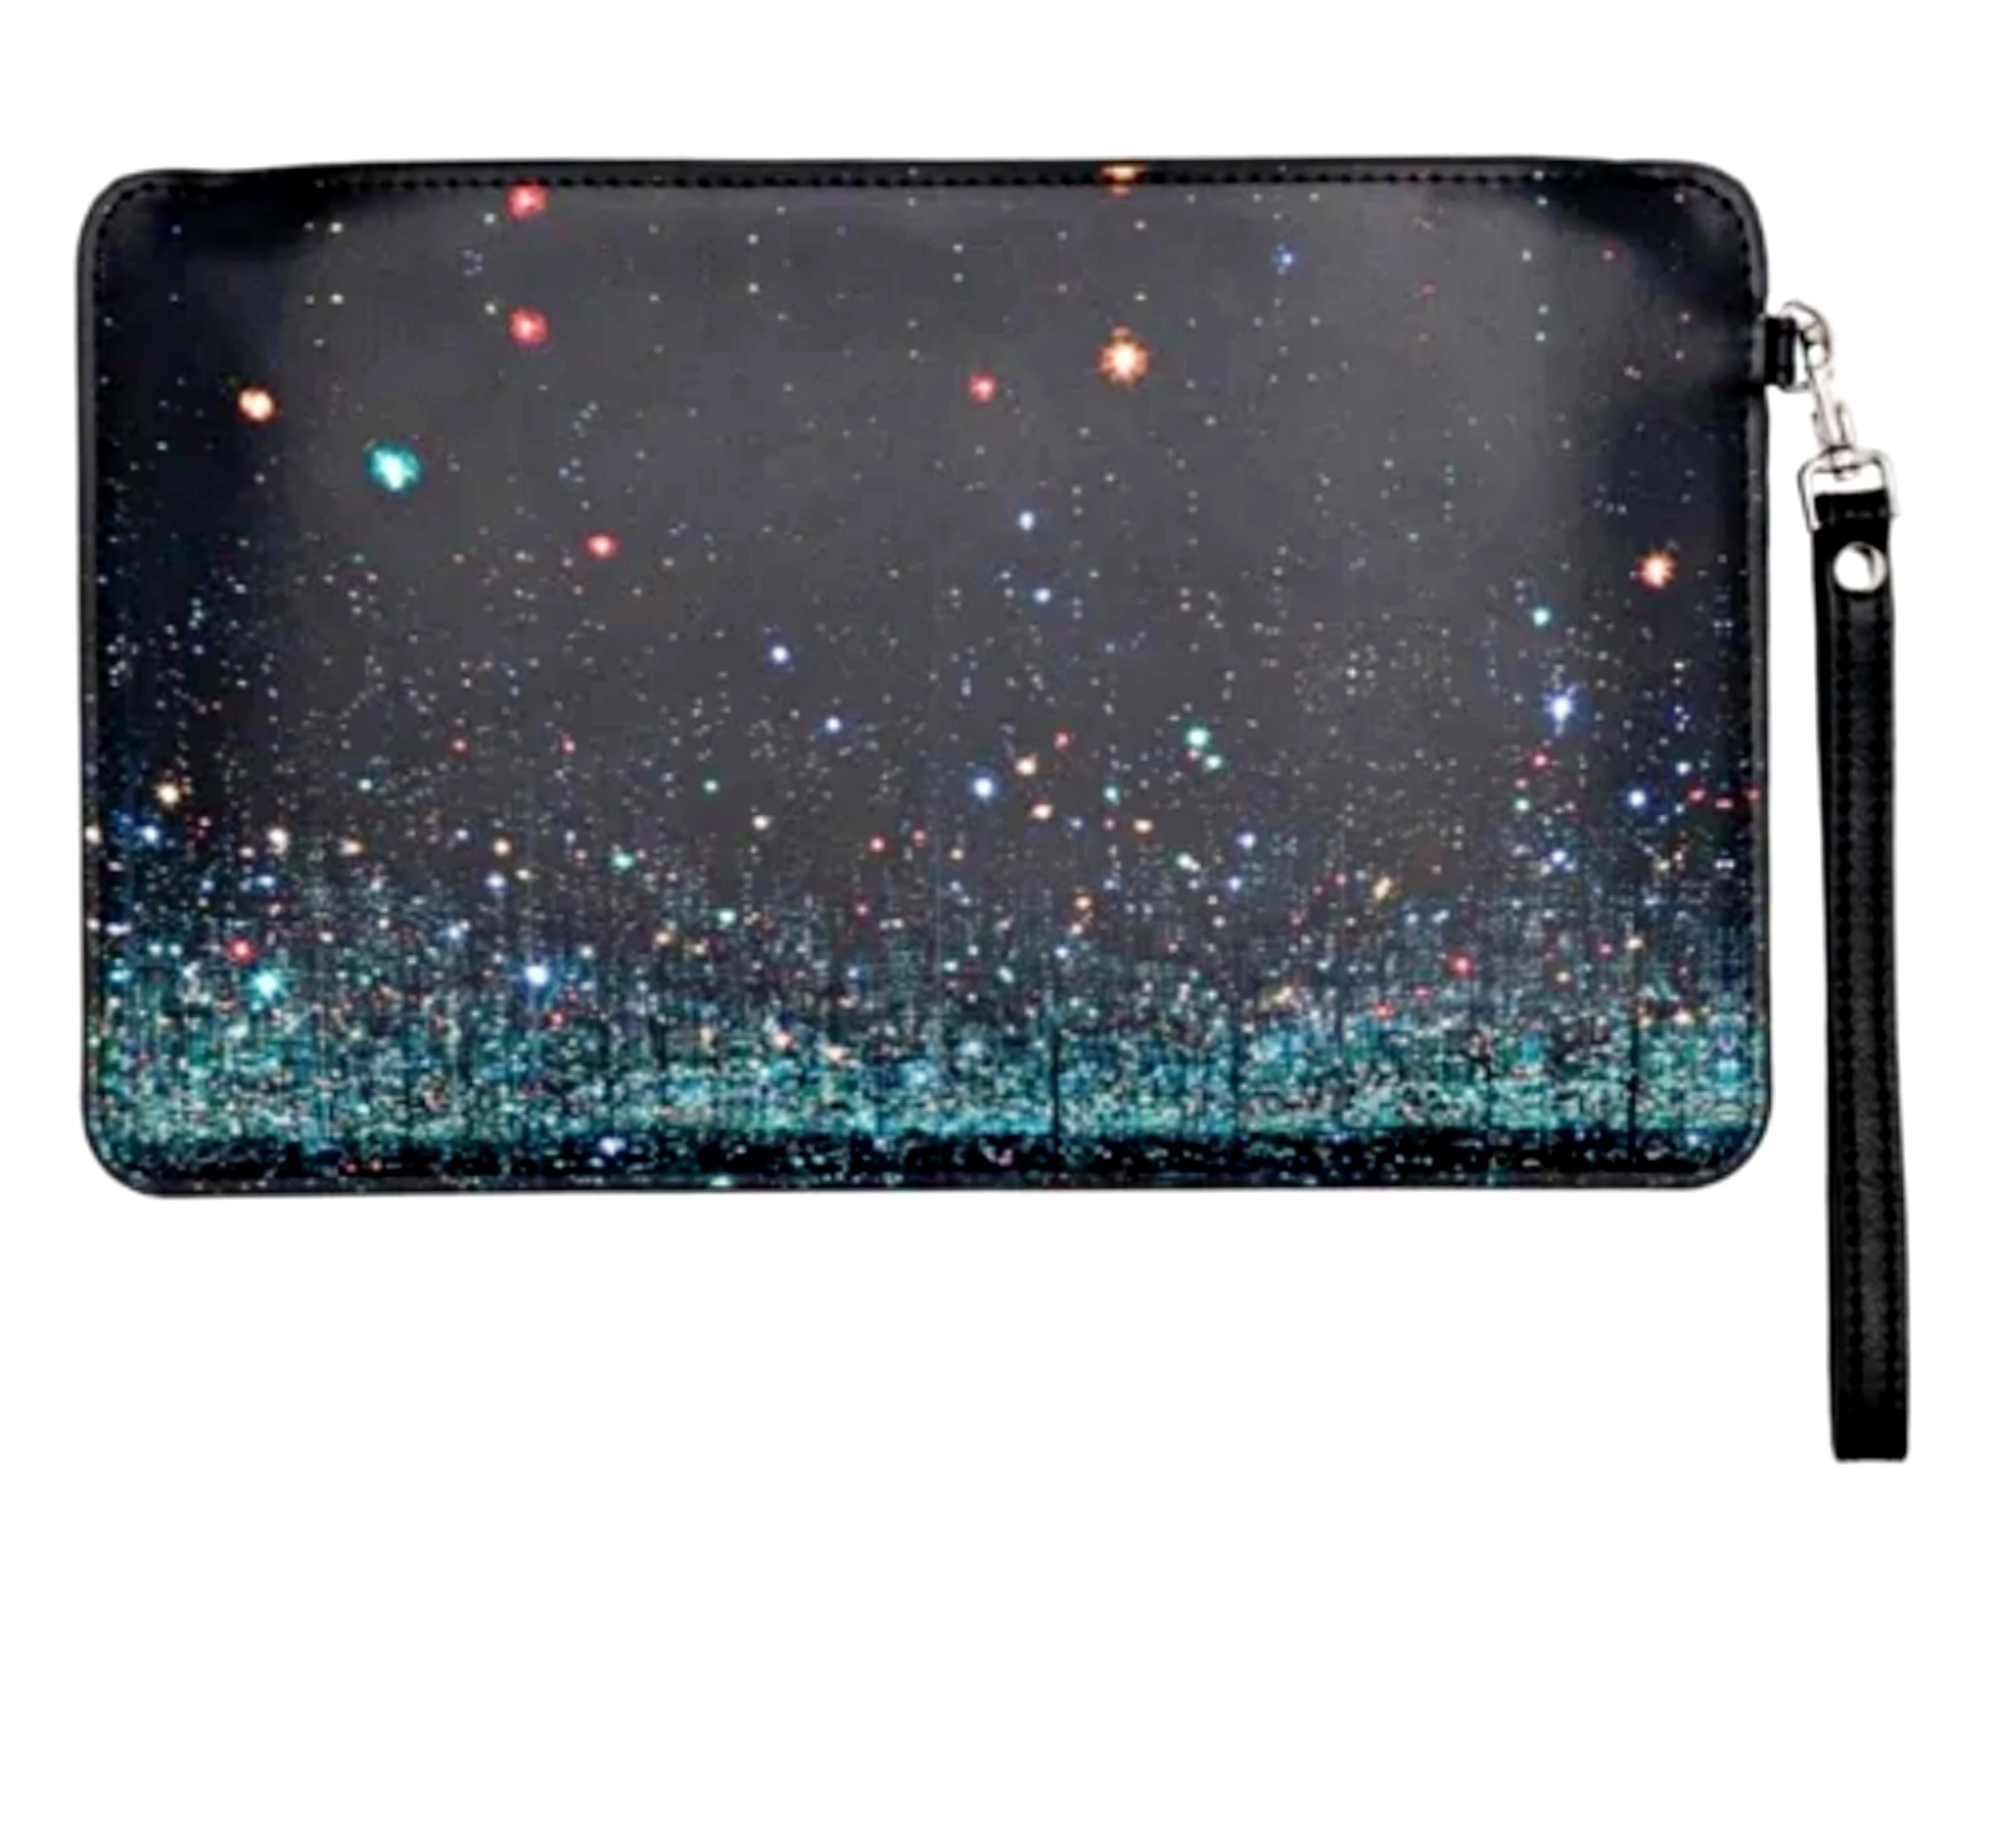 Infinity Mirrored Room: The Souls of Millions of Light Years Away Leather Clutch - Mixed Media Art by Yayoi Kusama